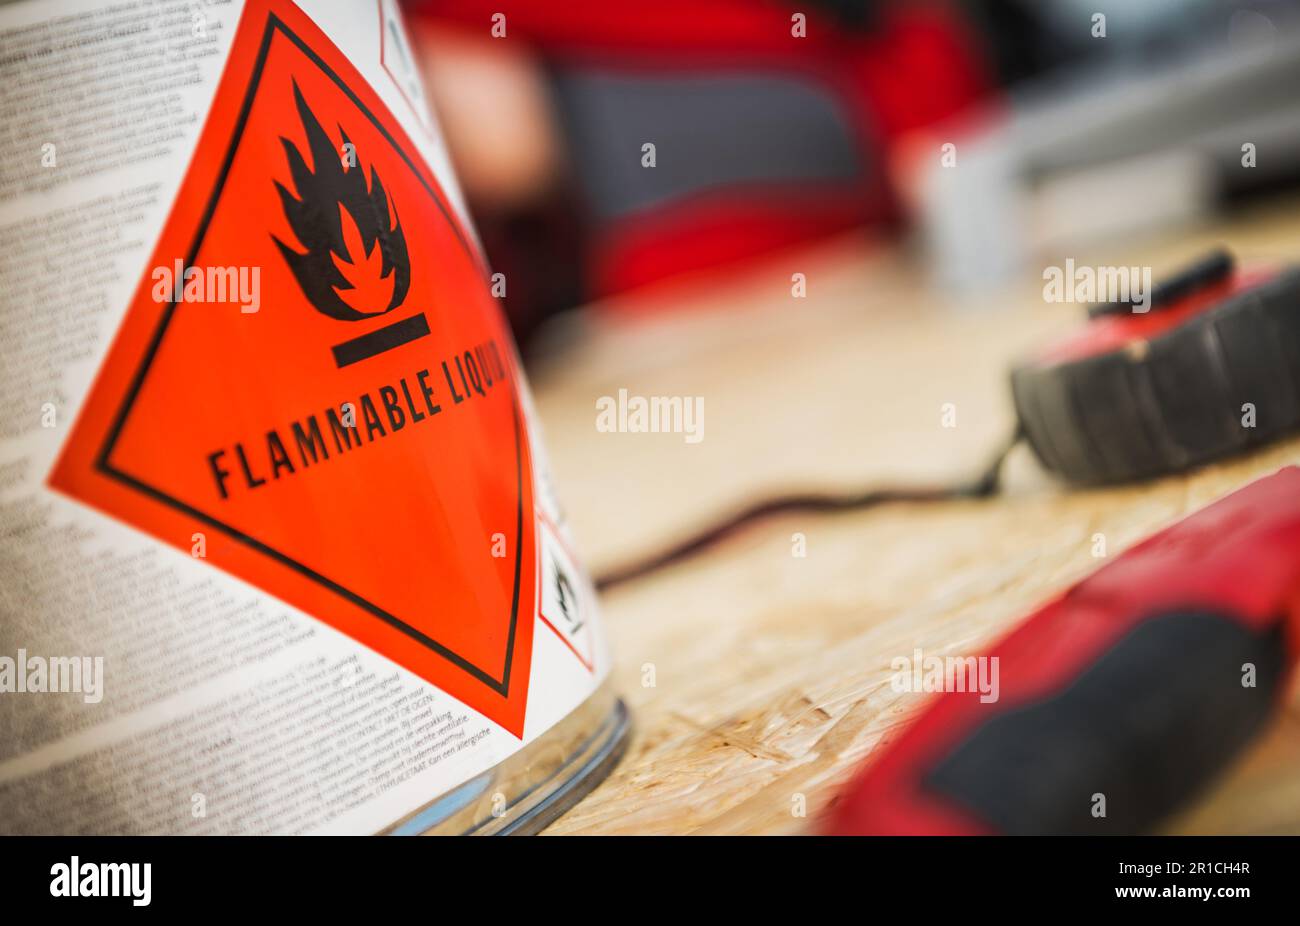 Flammable Liquid at Work. Metal Can with Dangerous Liquid Inside. Stock Photo